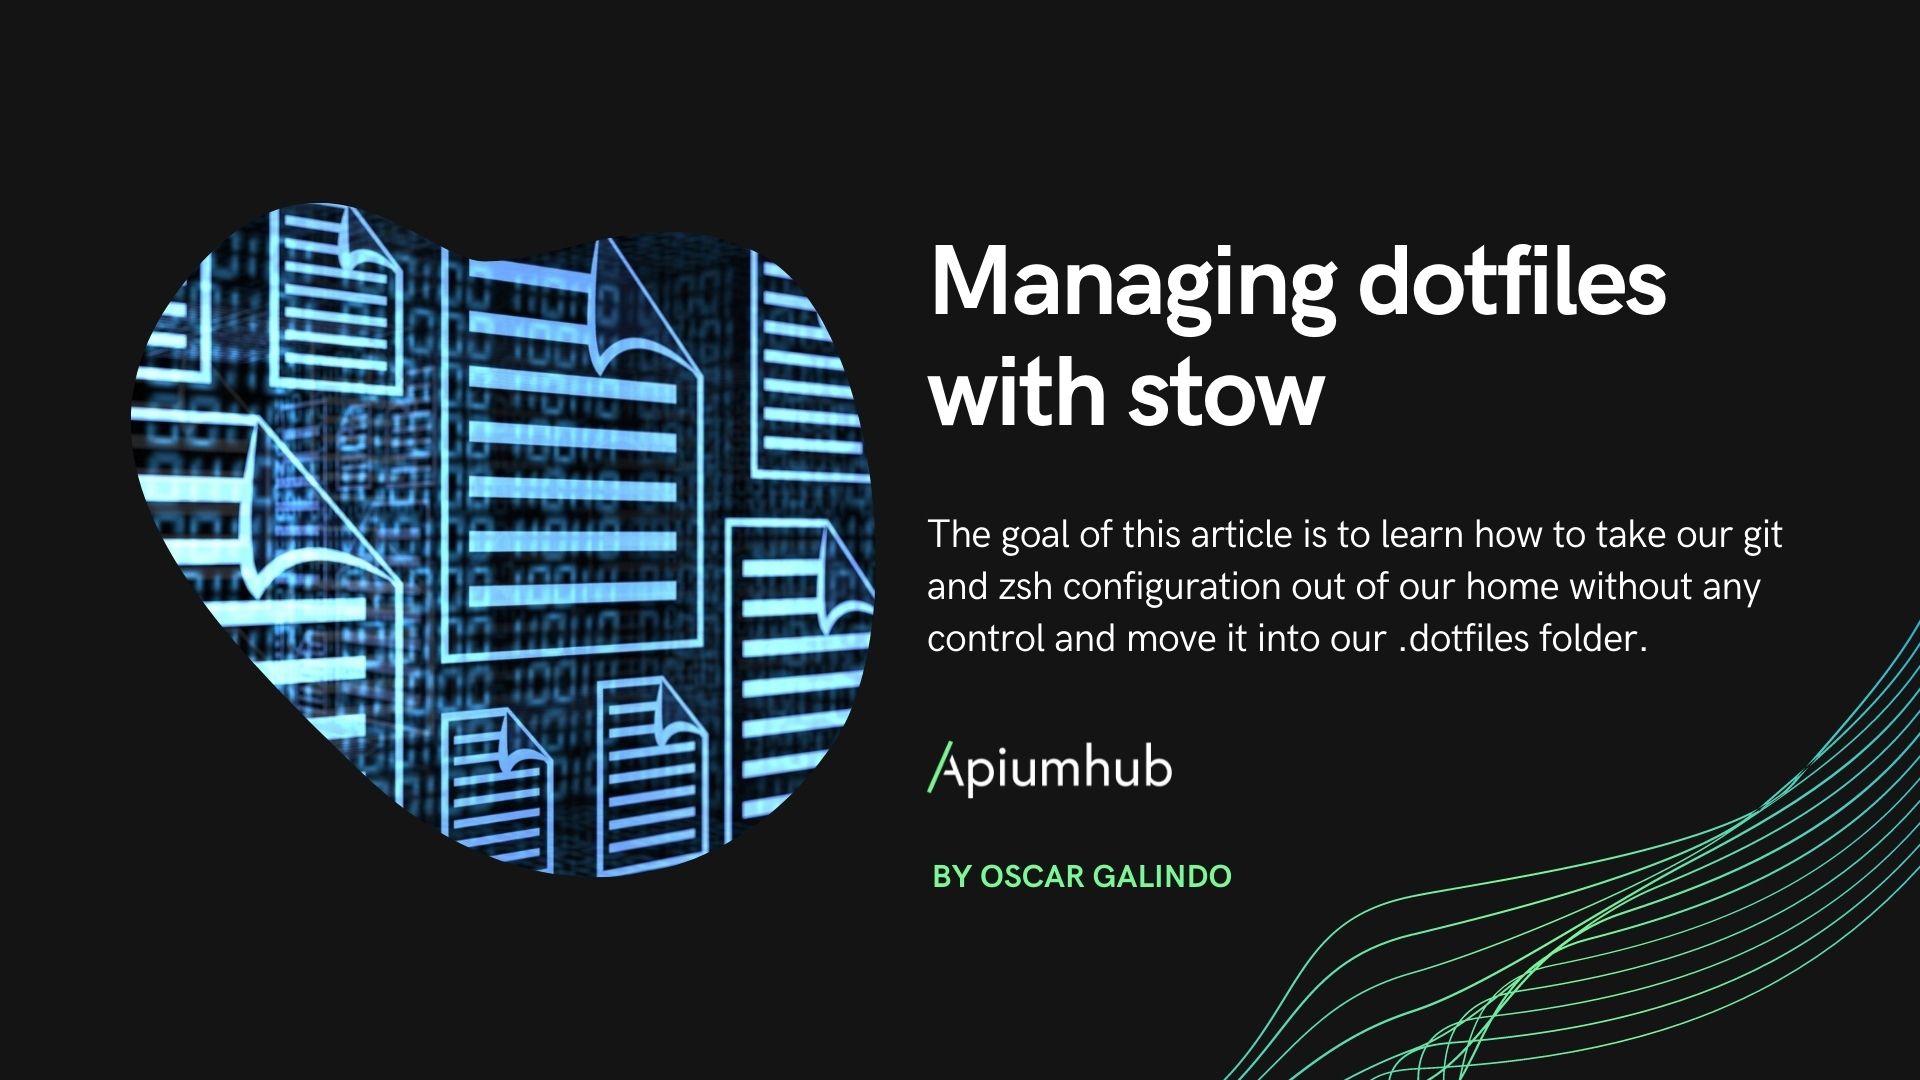 Managing dotfiles with stow